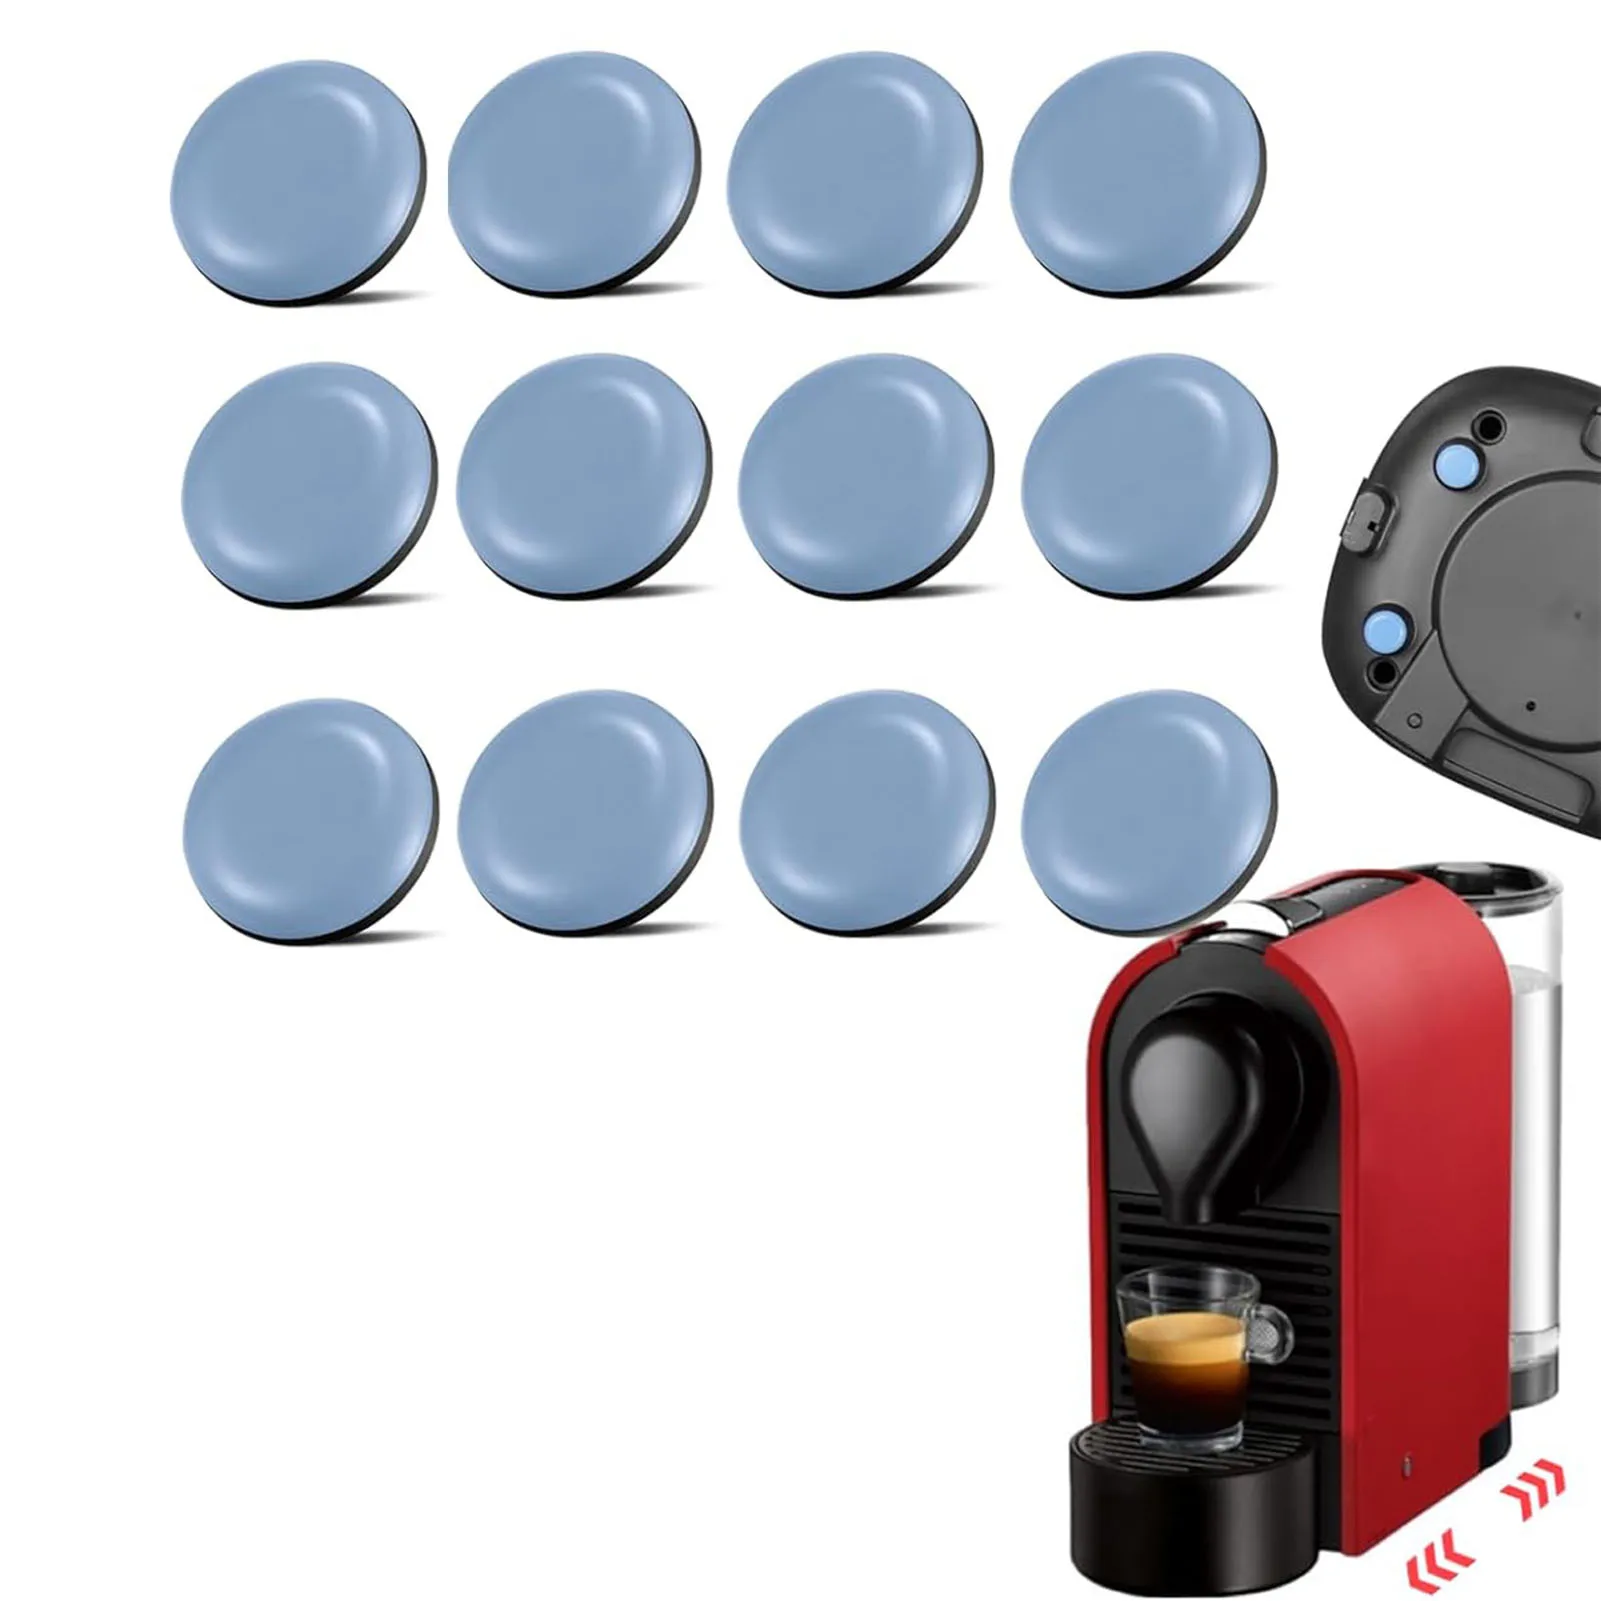 

12pcs Kitchen Appliance Feet Sliders Wear Resistant Round Smooth Friction Reducing Pad for Household Furniture Accessories